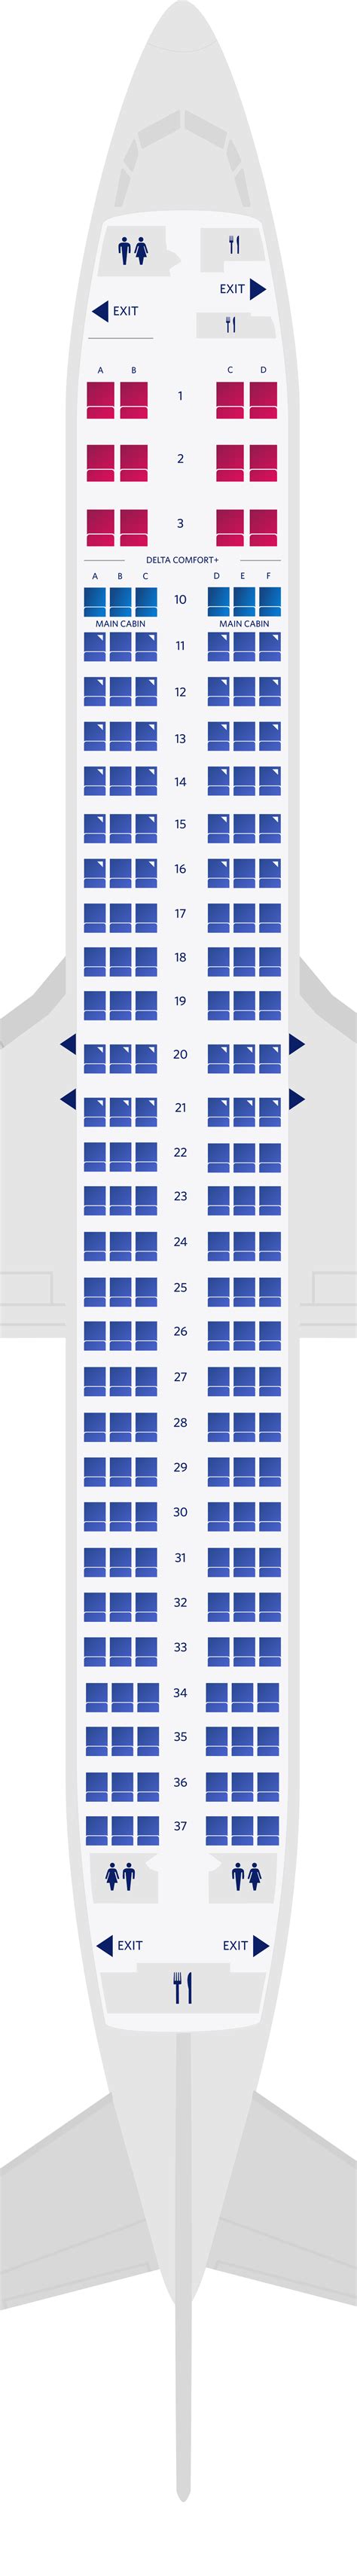 boeing 737-900 seat map united